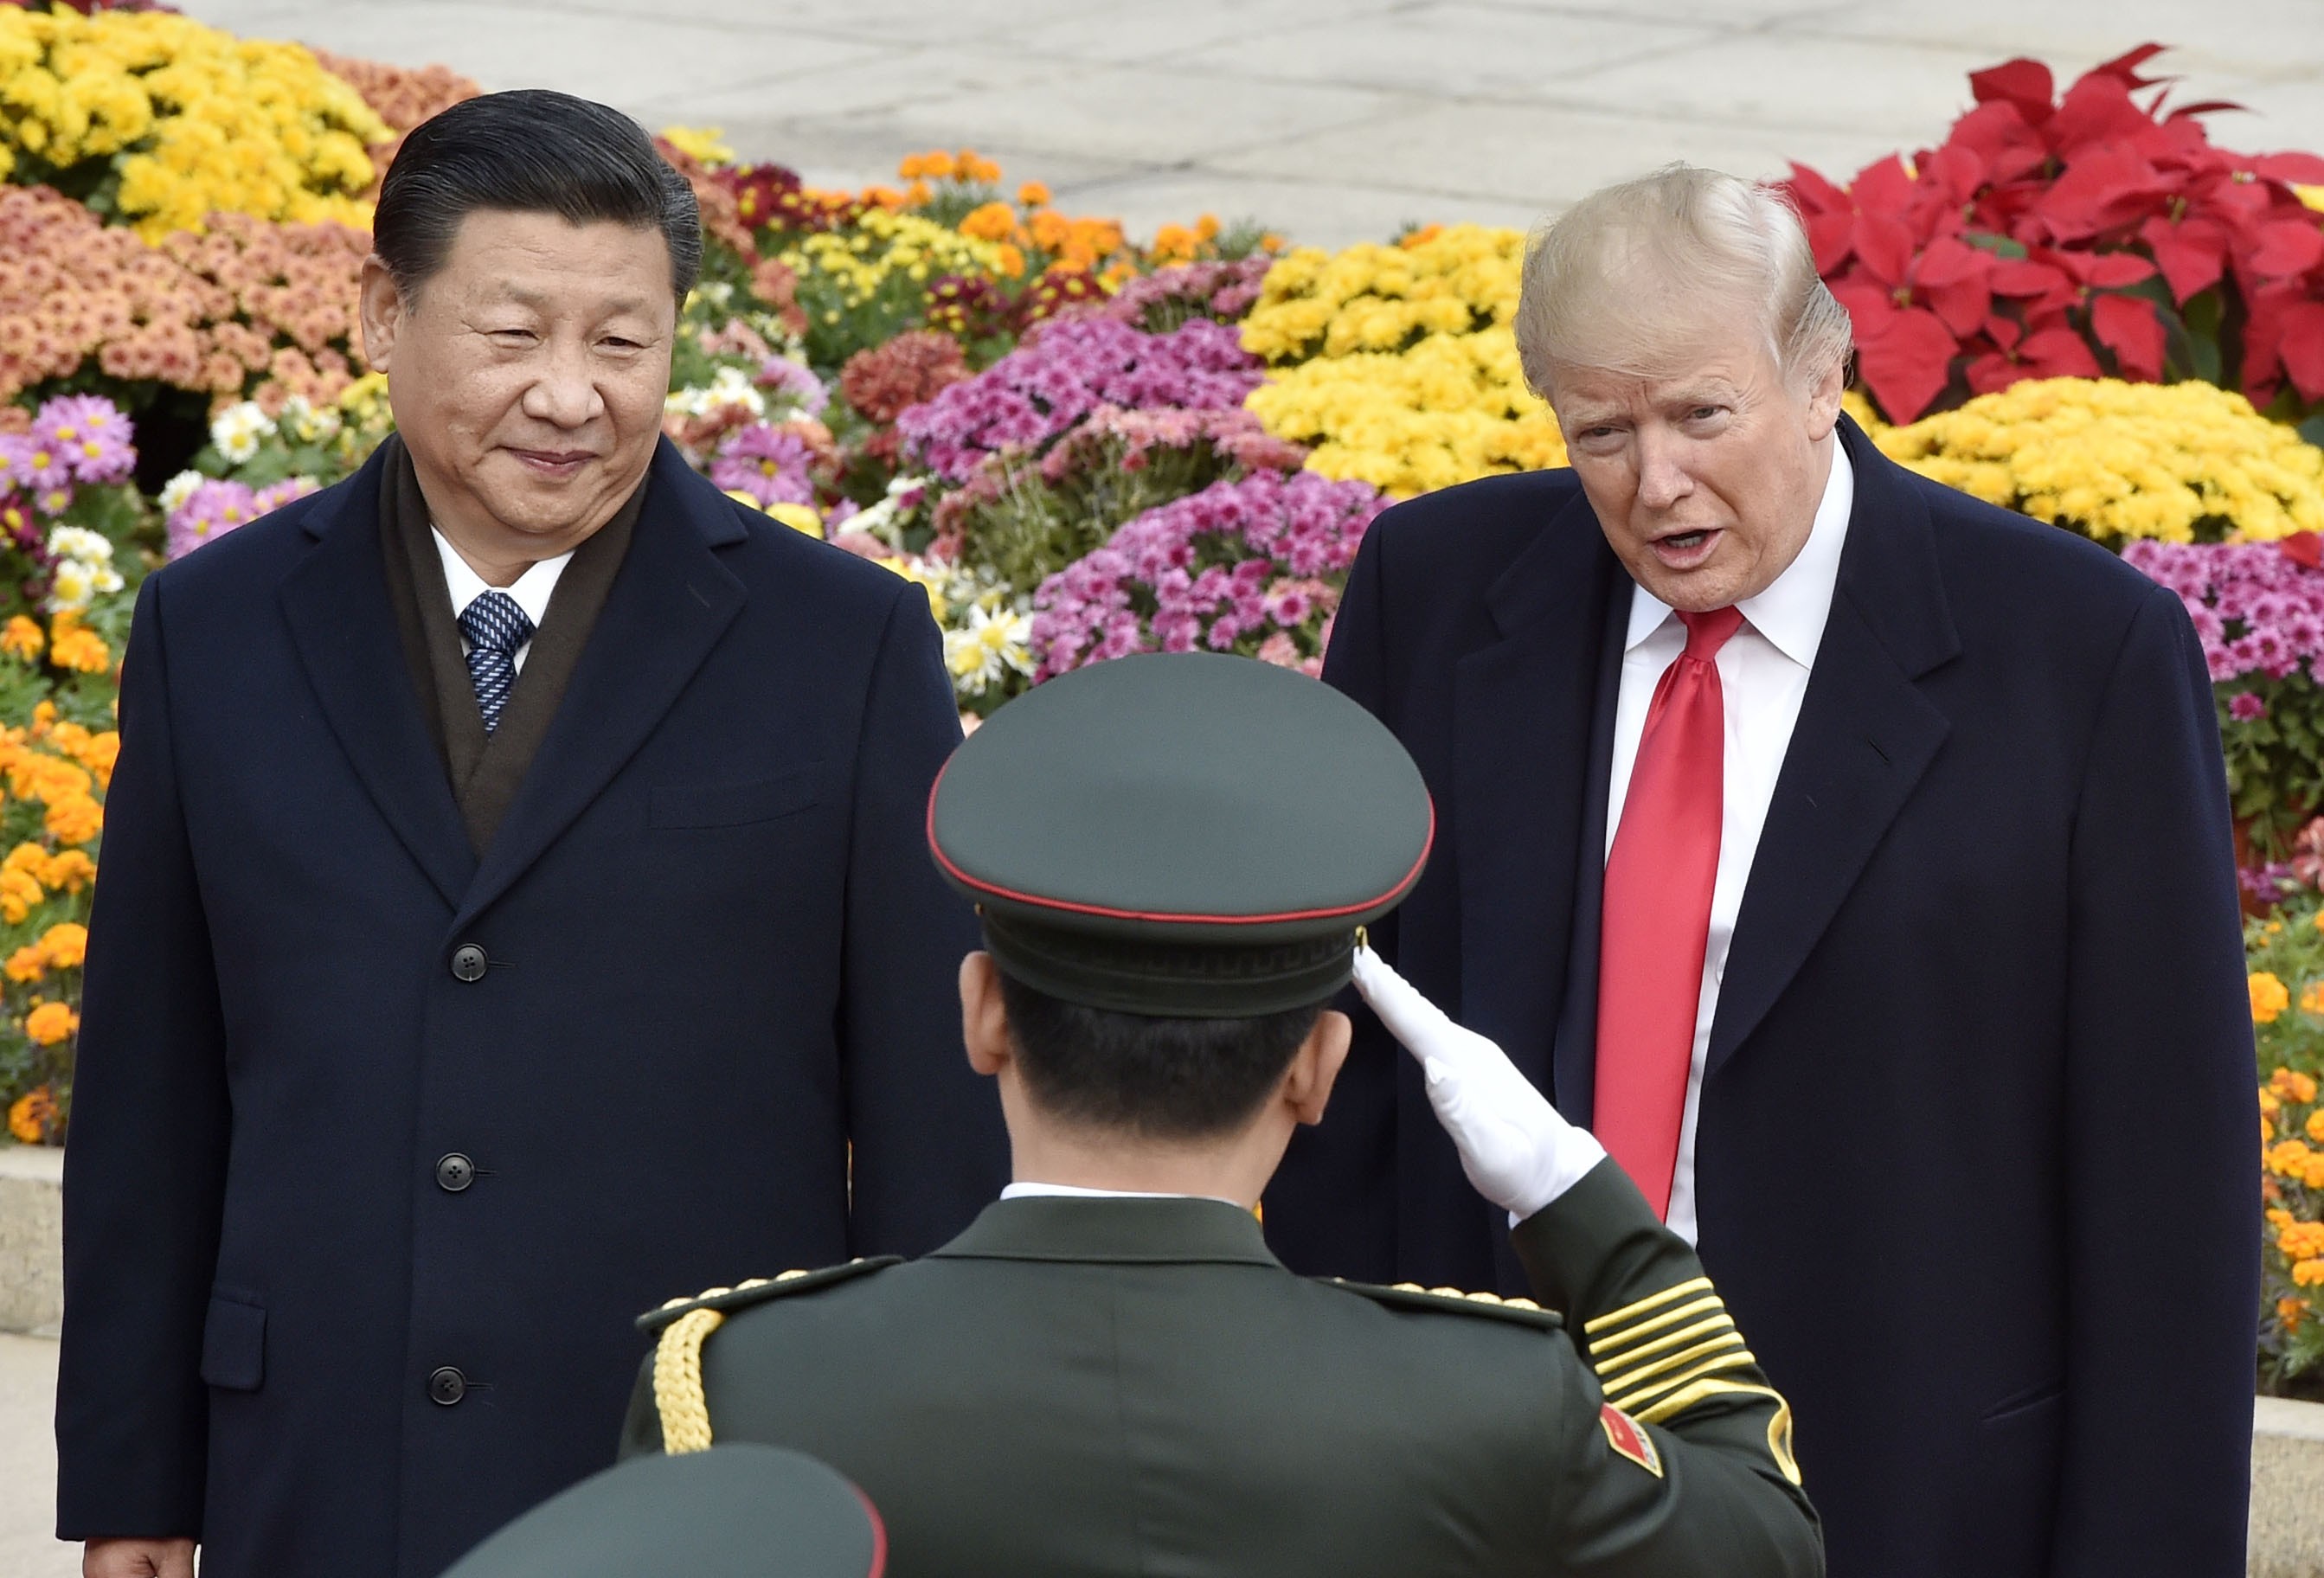 Chinese President Xi Jinping and US President Donald Trump attend a welcome ceremony in Beijing in November 2017. Photo: Kyodo